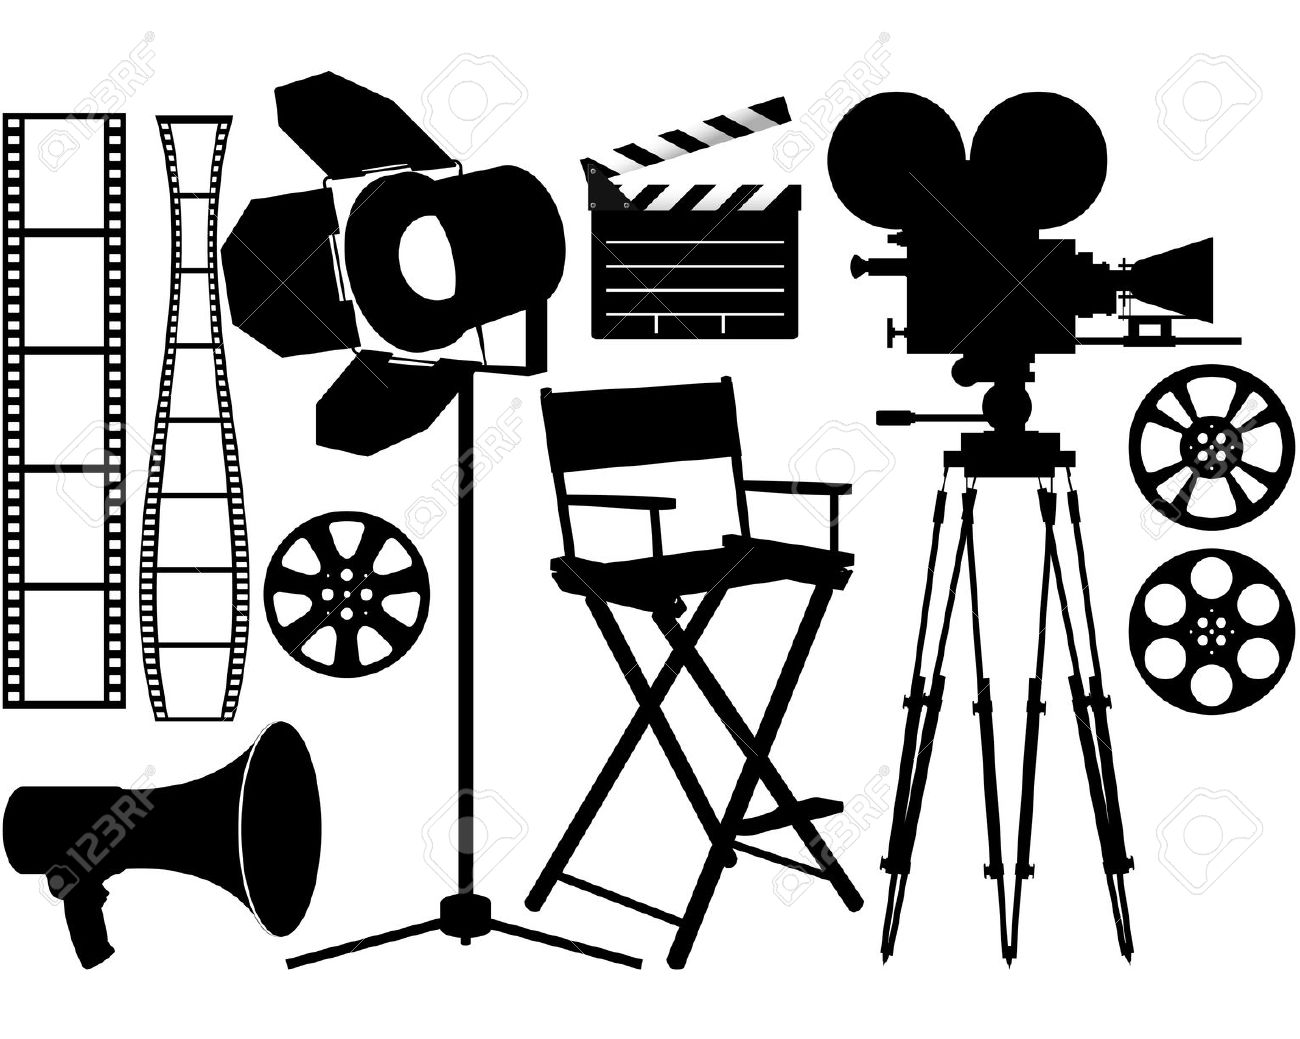 Film industry clipart